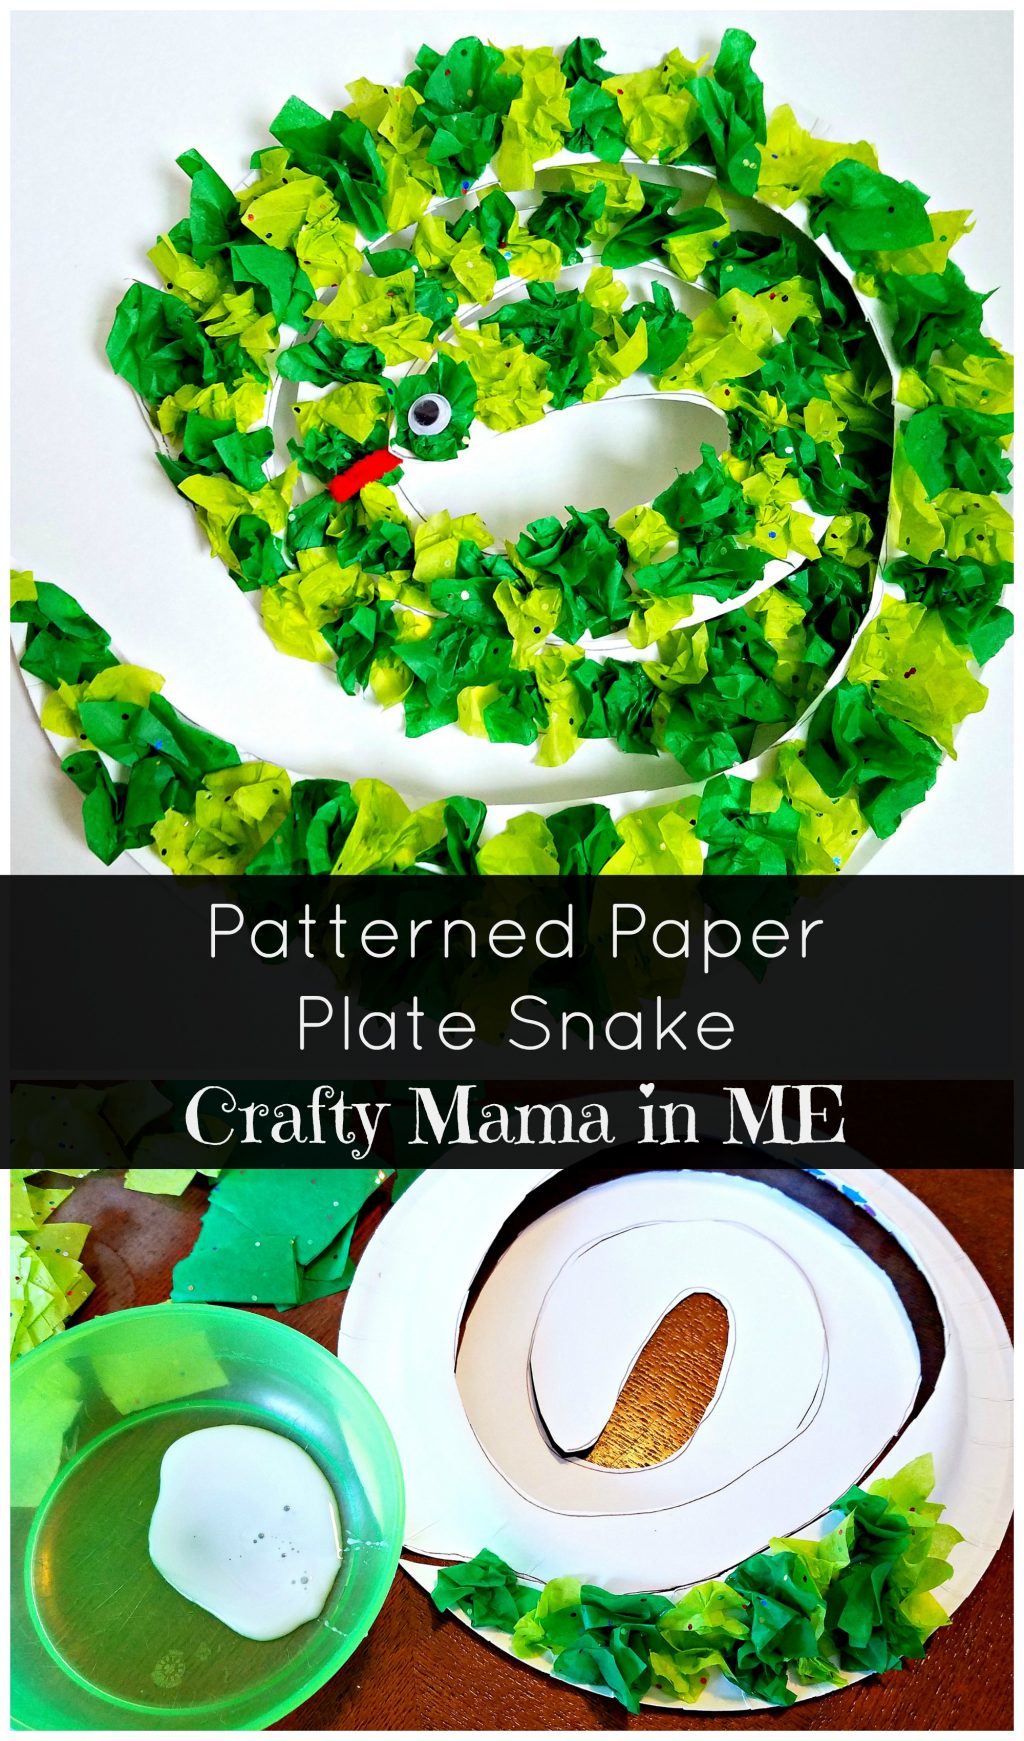 How to Make a Patterned Paper Plate Snake